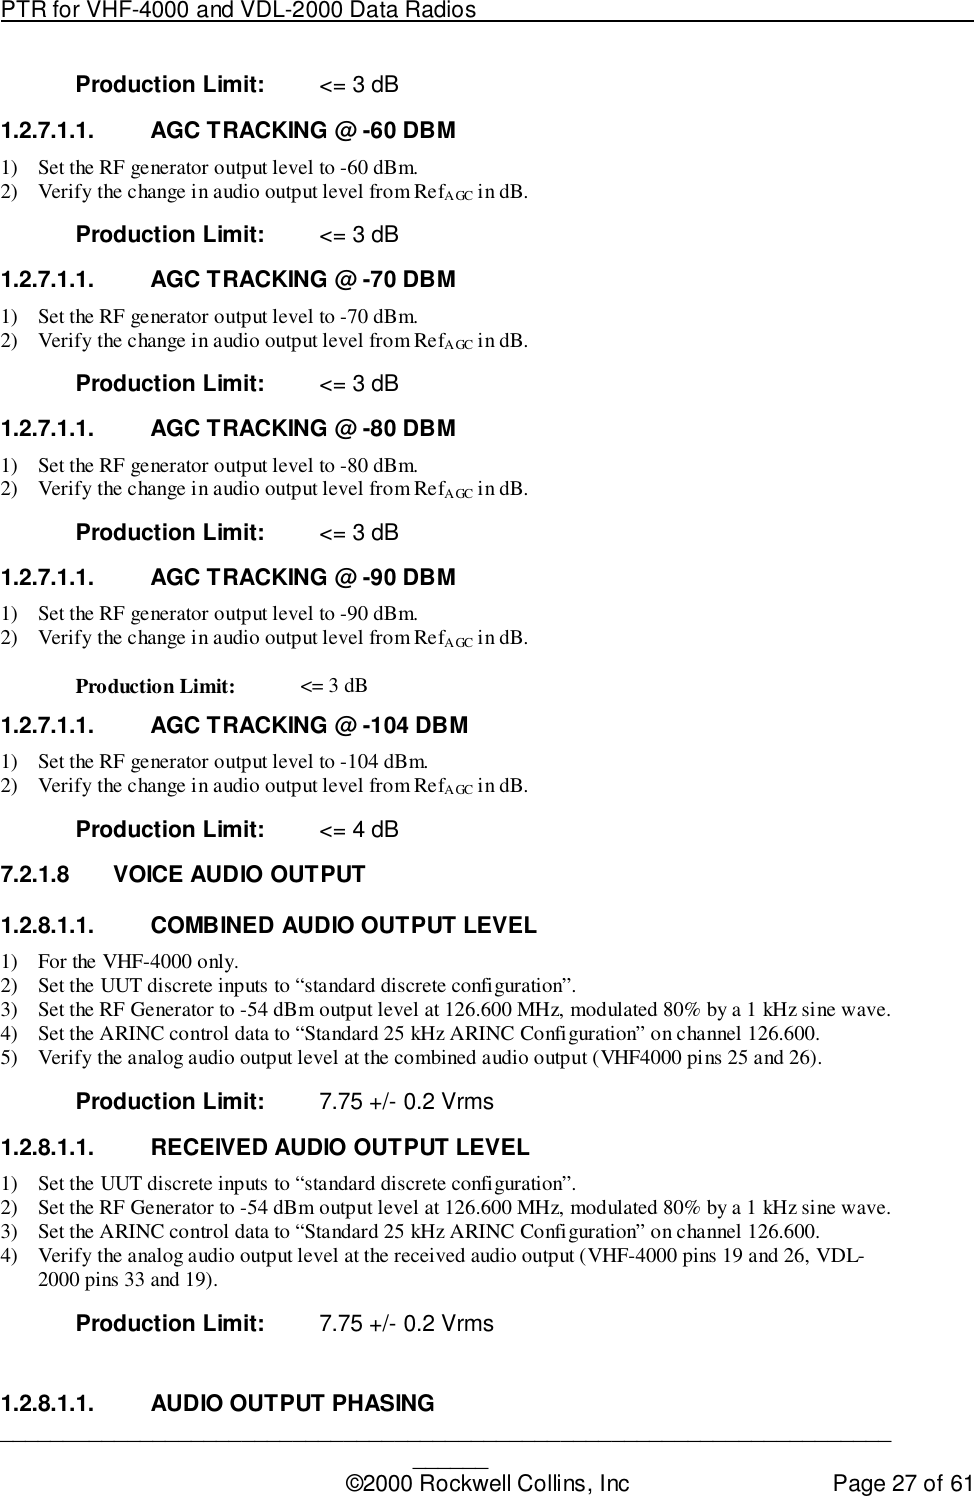 PTR for VHF-4000 and VDL-2000 Data Radios                                                                                ____________________________________________________________________________©2000 Rockwell Collins, Inc Page 27 of 61Production Limit: &lt;= 3 dB1.2.7.1.1.  AGC TRACKING @ -60 DBM1) Set the RF generator output level to -60 dBm.2) Verify the change in audio output level from RefAGC in dB.Production Limit: &lt;= 3 dB1.2.7.1.1.  AGC TRACKING @ -70 DBM1) Set the RF generator output level to -70 dBm.2) Verify the change in audio output level from RefAGC in dB.Production Limit: &lt;= 3 dB1.2.7.1.1.  AGC TRACKING @ -80 DBM1) Set the RF generator output level to -80 dBm.2) Verify the change in audio output level from RefAGC in dB.Production Limit: &lt;= 3 dB1.2.7.1.1.  AGC TRACKING @ -90 DBM1) Set the RF generator output level to -90 dBm.2) Verify the change in audio output level from RefAGC in dB.Production Limit: &lt;= 3 dB1.2.7.1.1.  AGC TRACKING @ -104 DBM1) Set the RF generator output level to -104 dBm.2) Verify the change in audio output level from RefAGC in dB.Production Limit: &lt;= 4 dB7.2.1.8  VOICE AUDIO OUTPUT1.2.8.1.1.  COMBINED AUDIO OUTPUT LEVEL1) For the VHF-4000 only.2) Set the UUT discrete inputs to “standard discrete configuration”.3) Set the RF Generator to -54 dBm output level at 126.600 MHz, modulated 80% by a 1 kHz sine wave.4) Set the ARINC control data to “Standard 25 kHz ARINC Configuration” on channel 126.600.5) Verify the analog audio output level at the combined audio output (VHF4000 pins 25 and 26).Production Limit: 7.75 +/- 0.2 Vrms1.2.8.1.1.  RECEIVED AUDIO OUTPUT LEVEL1) Set the UUT discrete inputs to “standard discrete configuration”.2) Set the RF Generator to -54 dBm output level at 126.600 MHz, modulated 80% by a 1 kHz sine wave.3) Set the ARINC control data to “Standard 25 kHz ARINC Configuration” on channel 126.600.4) Verify the analog audio output level at the received audio output (VHF-4000 pins 19 and 26, VDL-2000 pins 33 and 19).Production Limit: 7.75 +/- 0.2 Vrms1.2.8.1.1. AUDIO OUTPUT PHASING